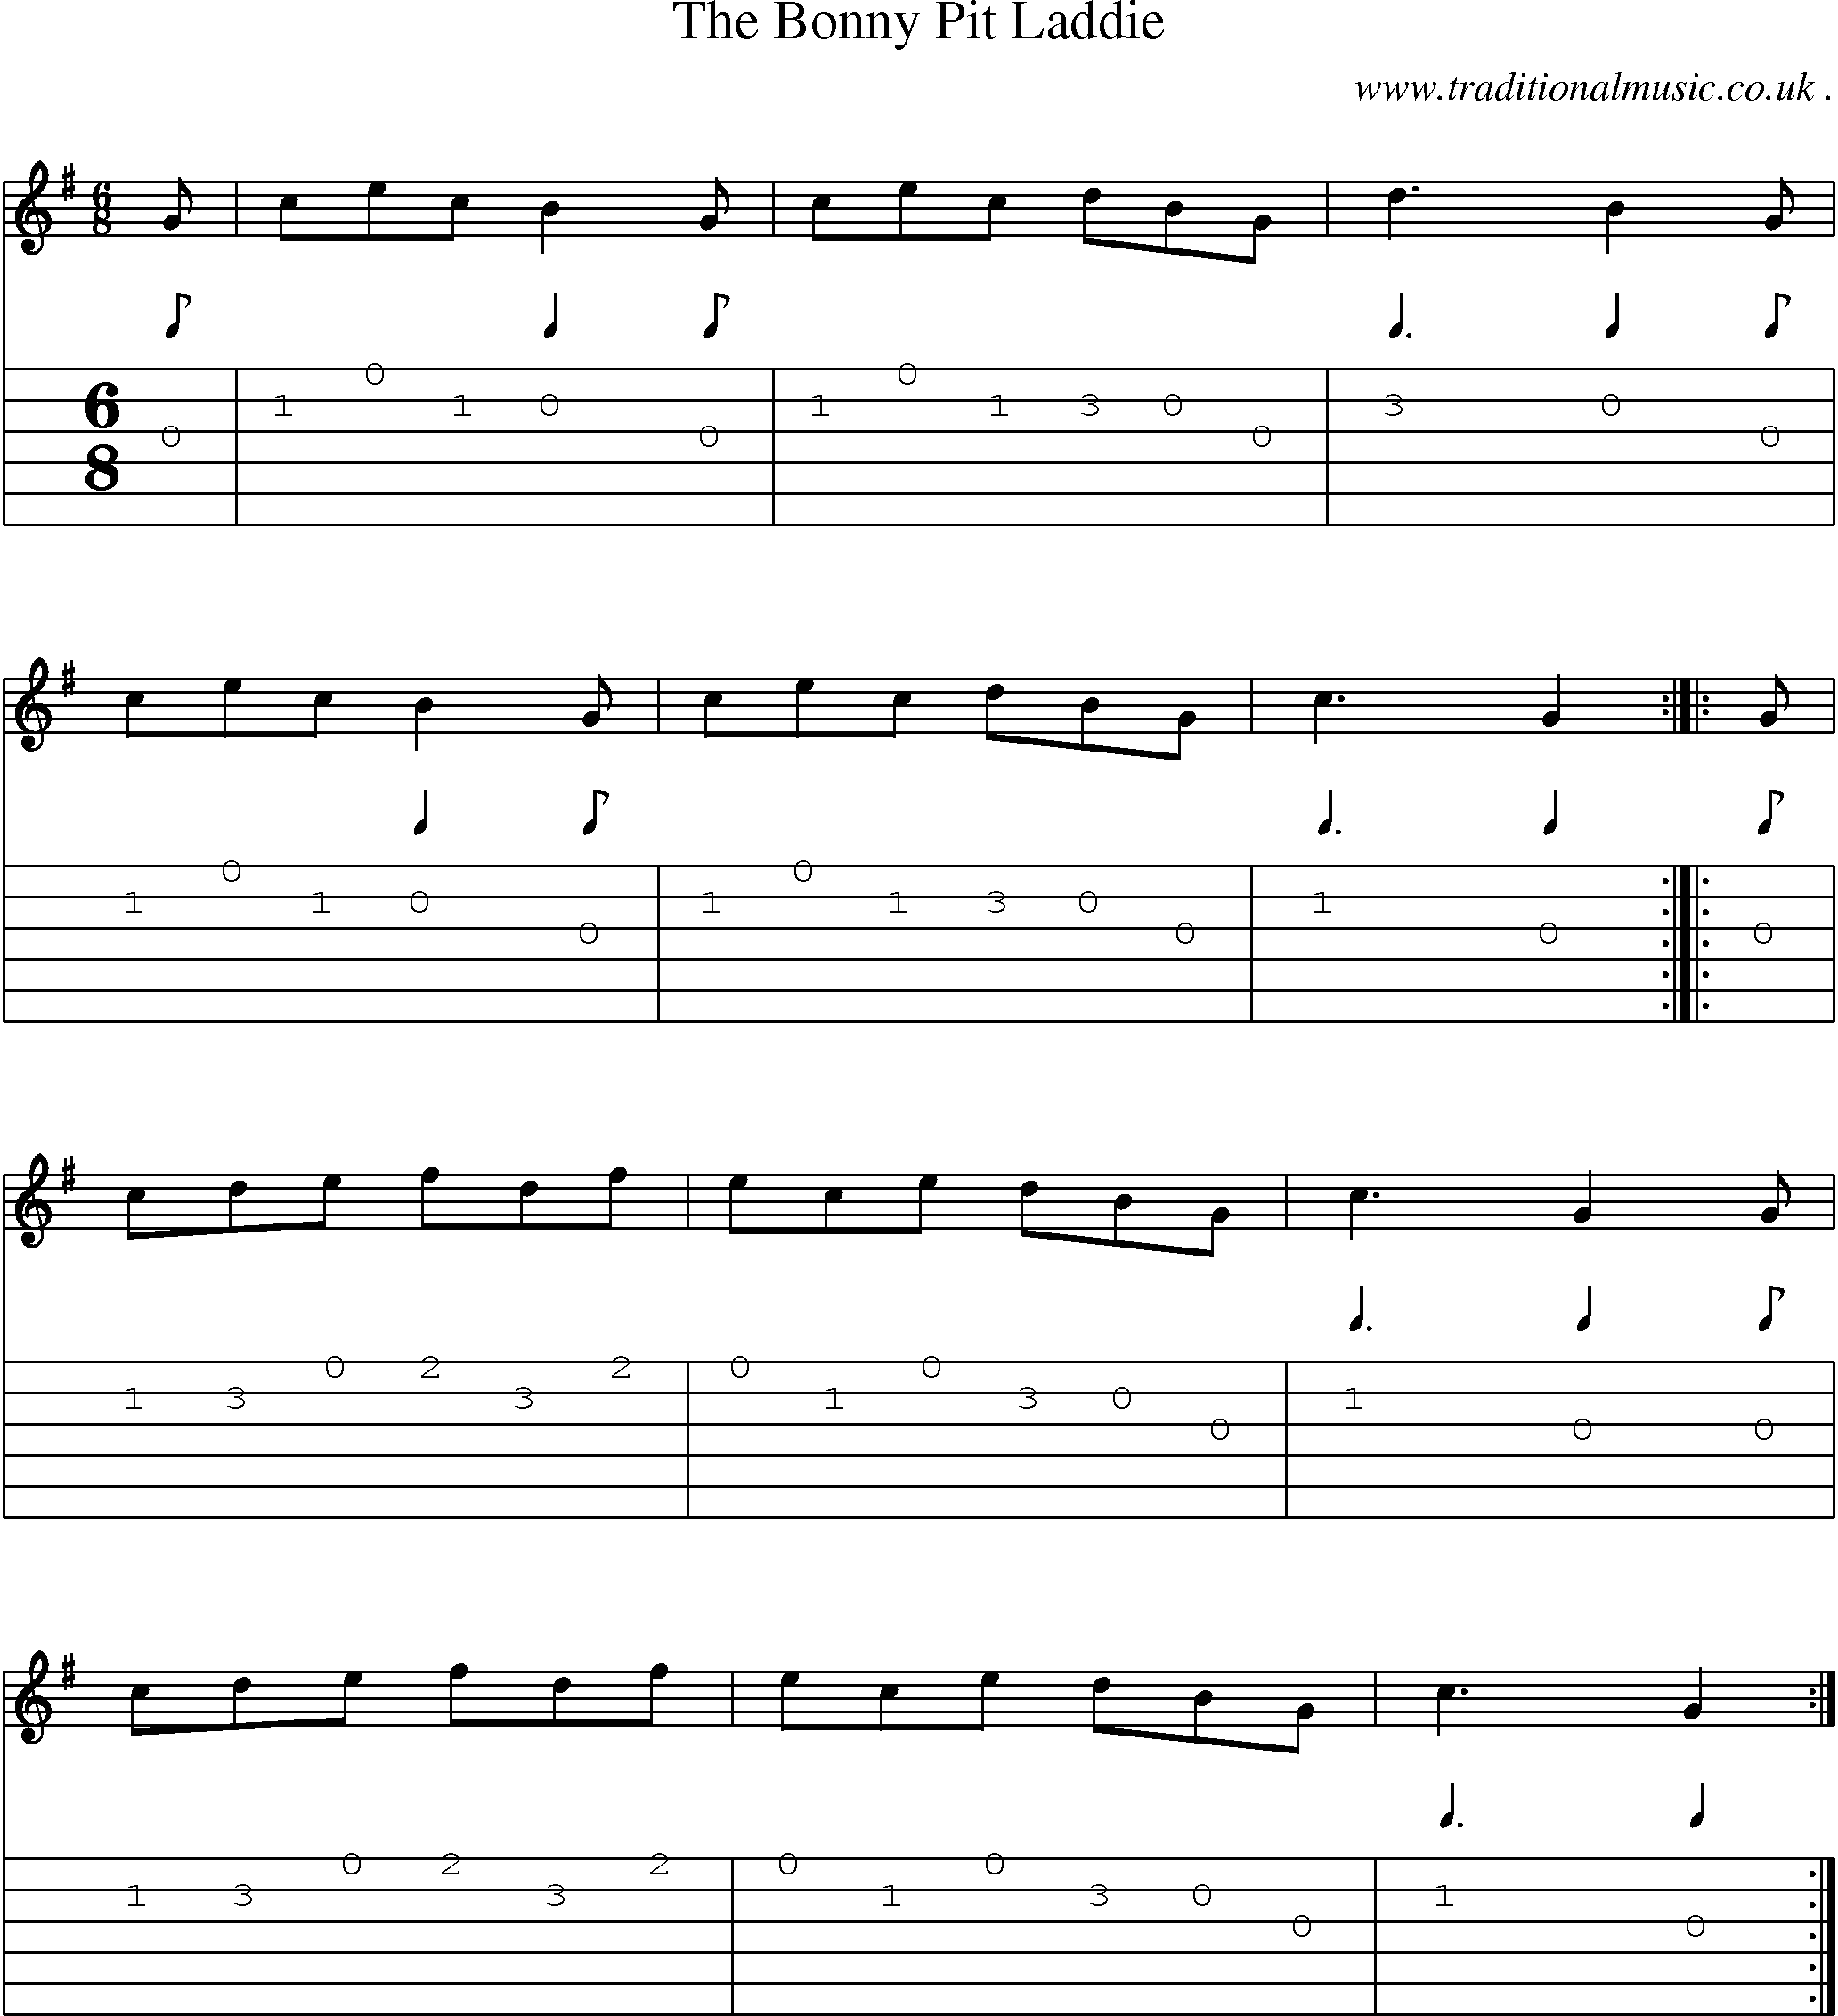 Sheet-Music and Guitar Tabs for The Bonny Pit Laddie